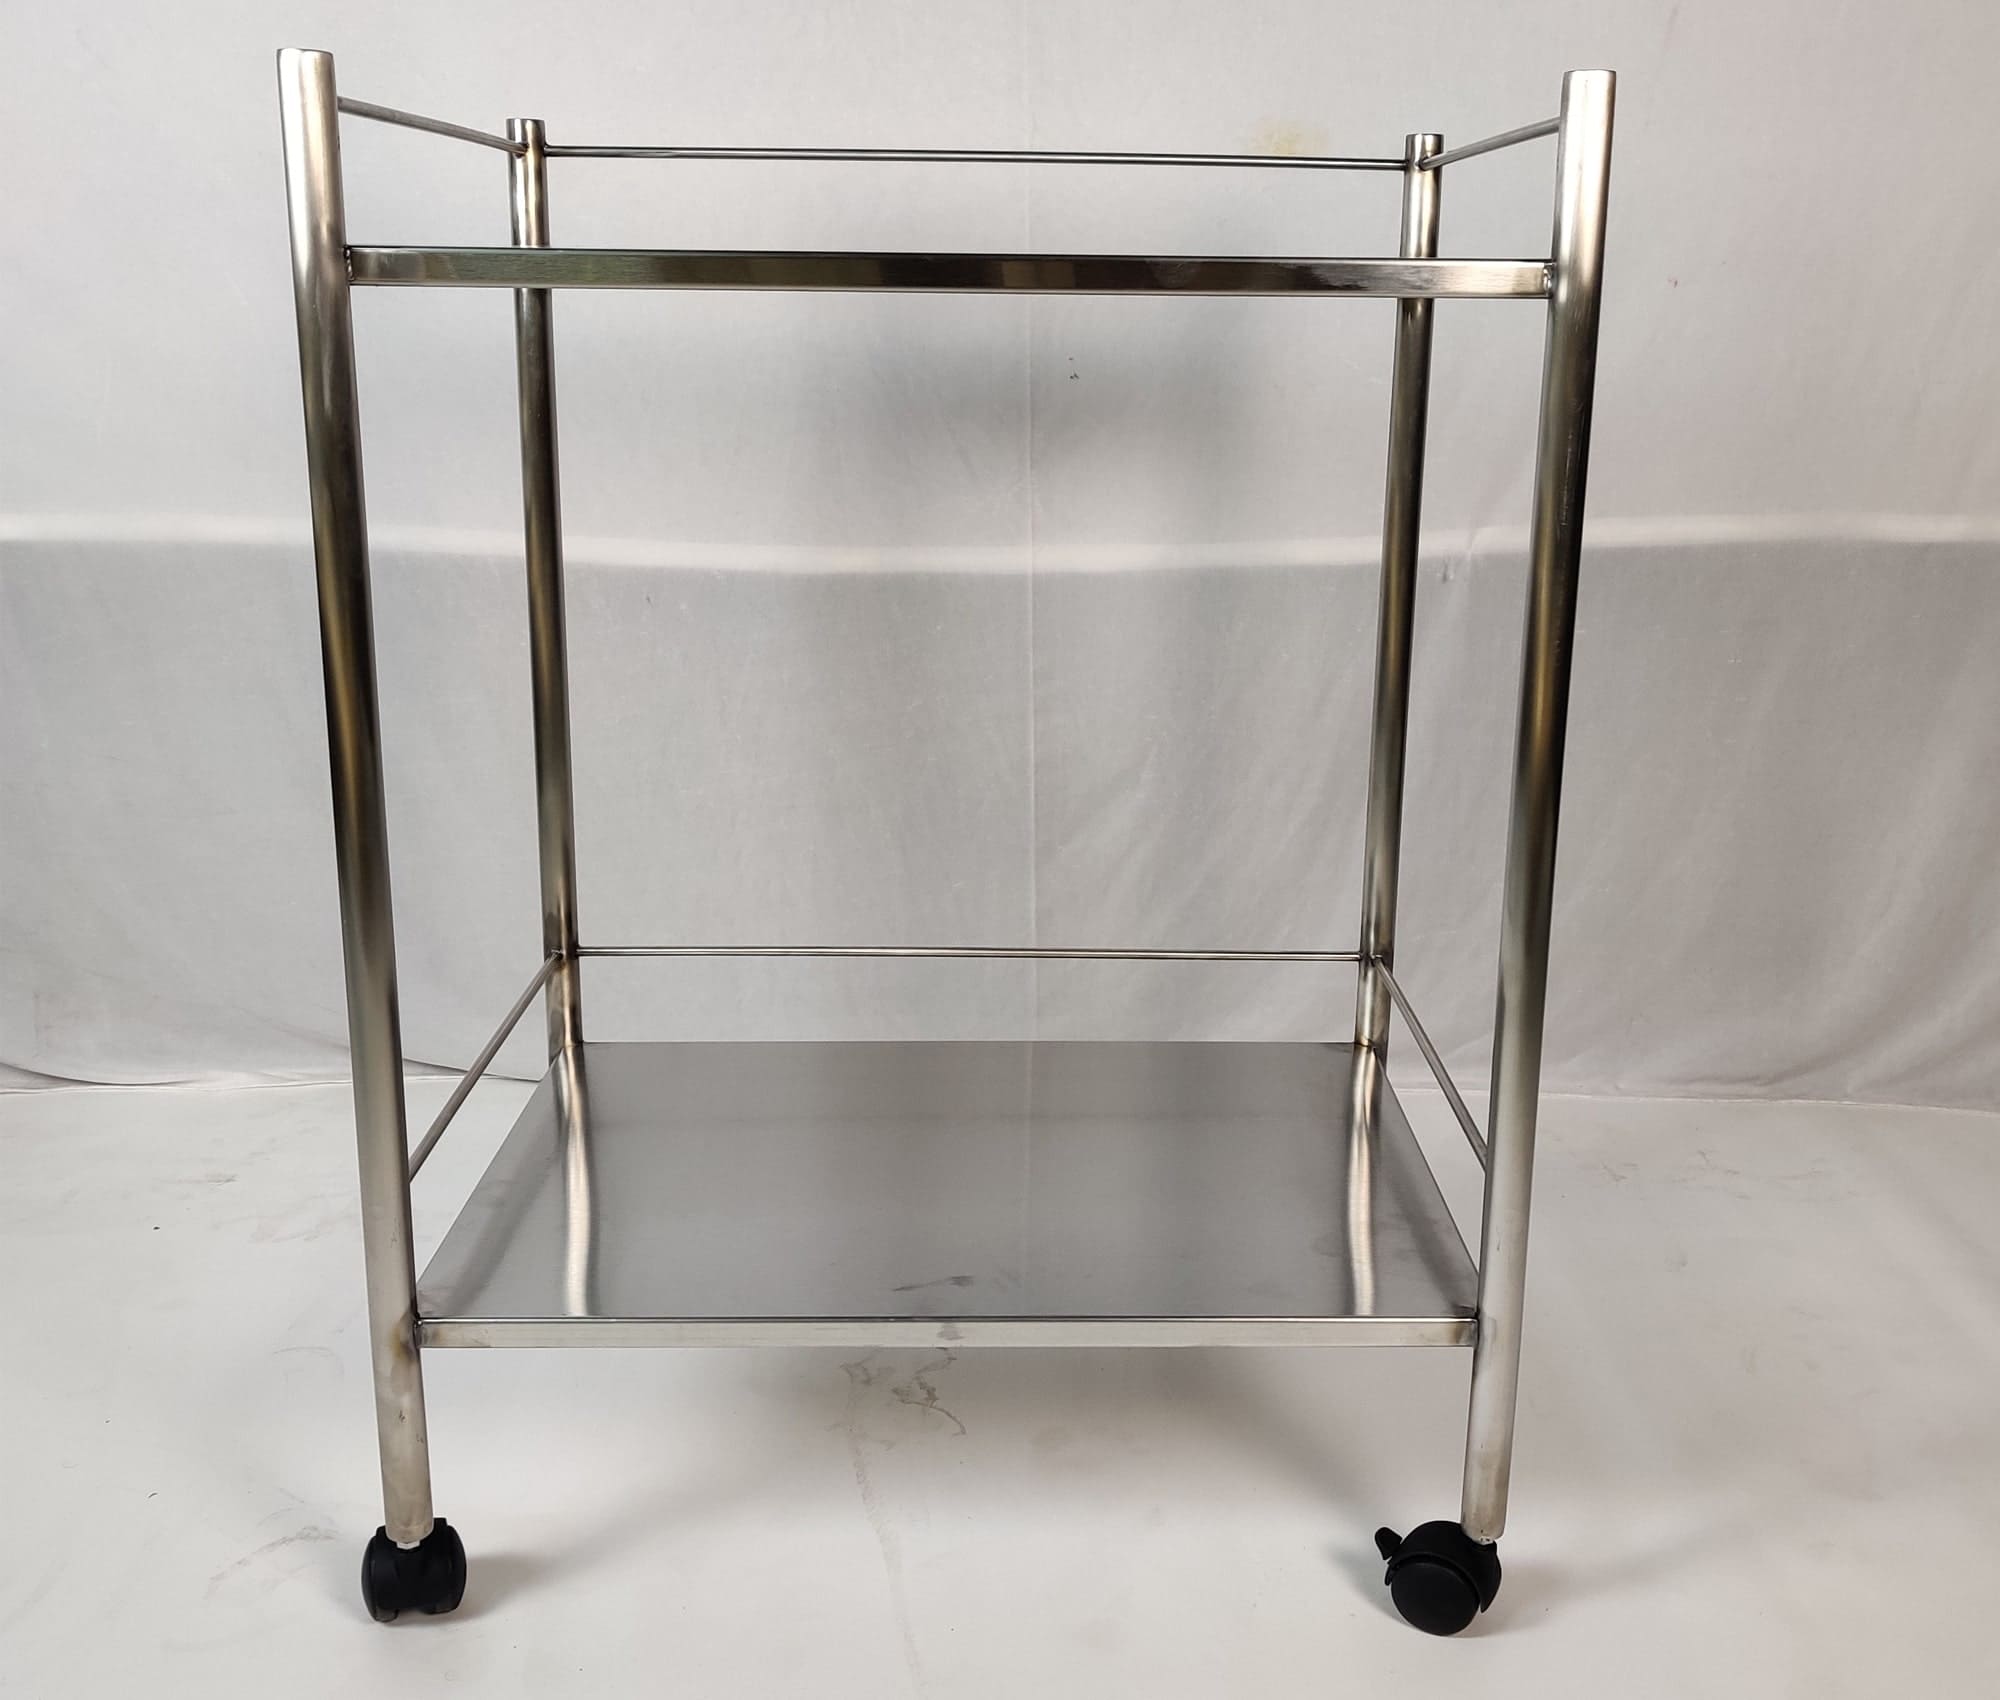 Instrument Trolley for Hospitals